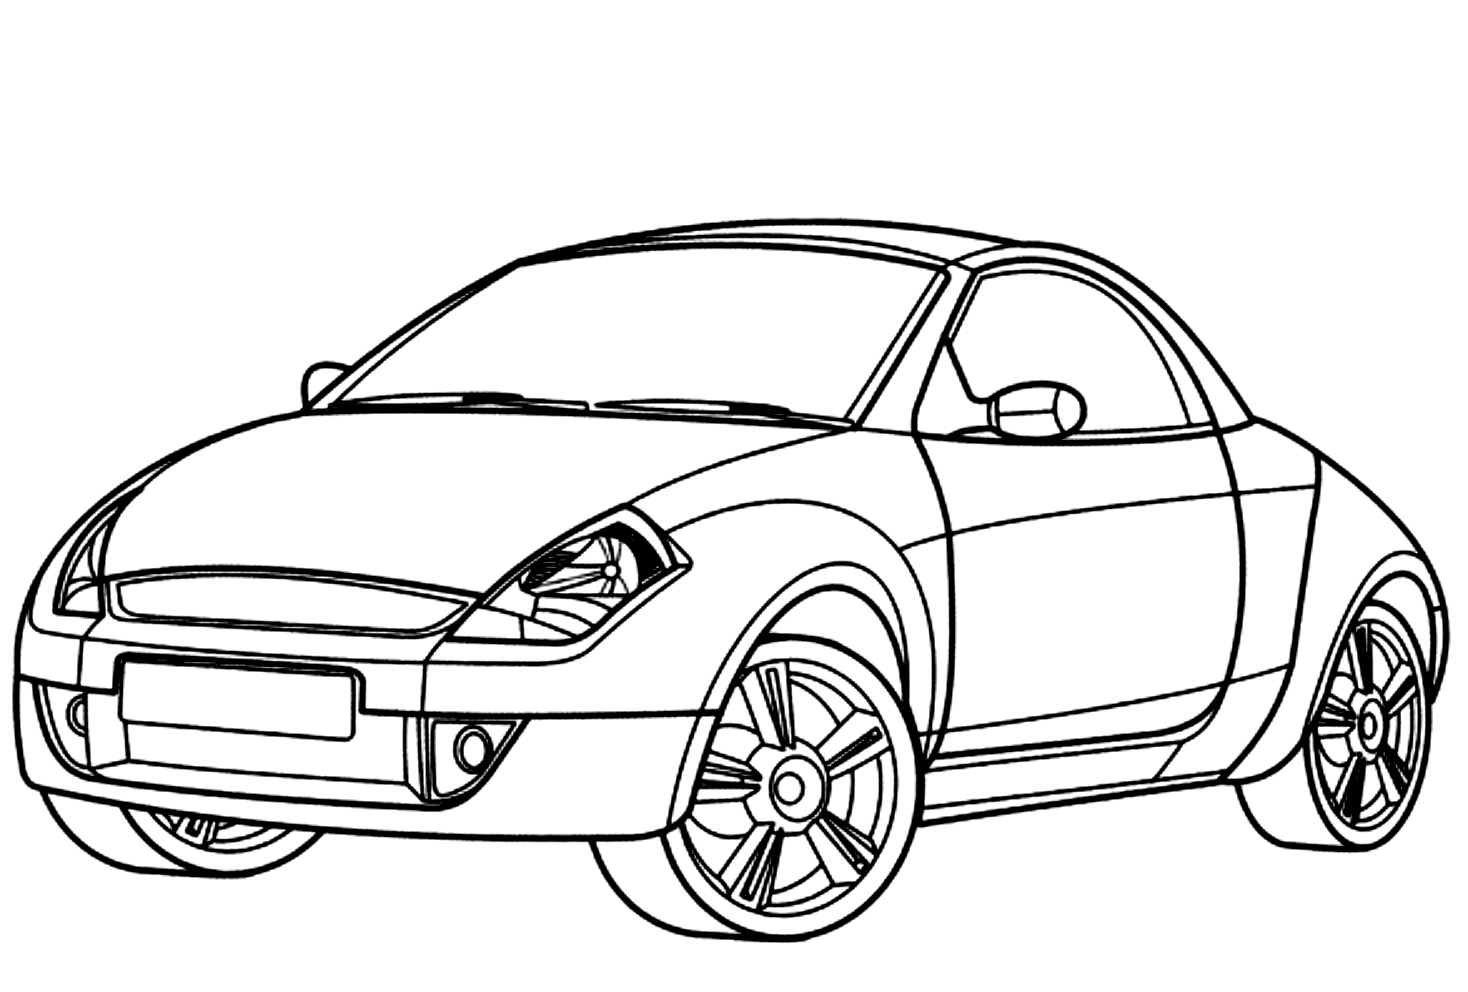 Drawing 18 from Automobiles coloring page to print and coloring